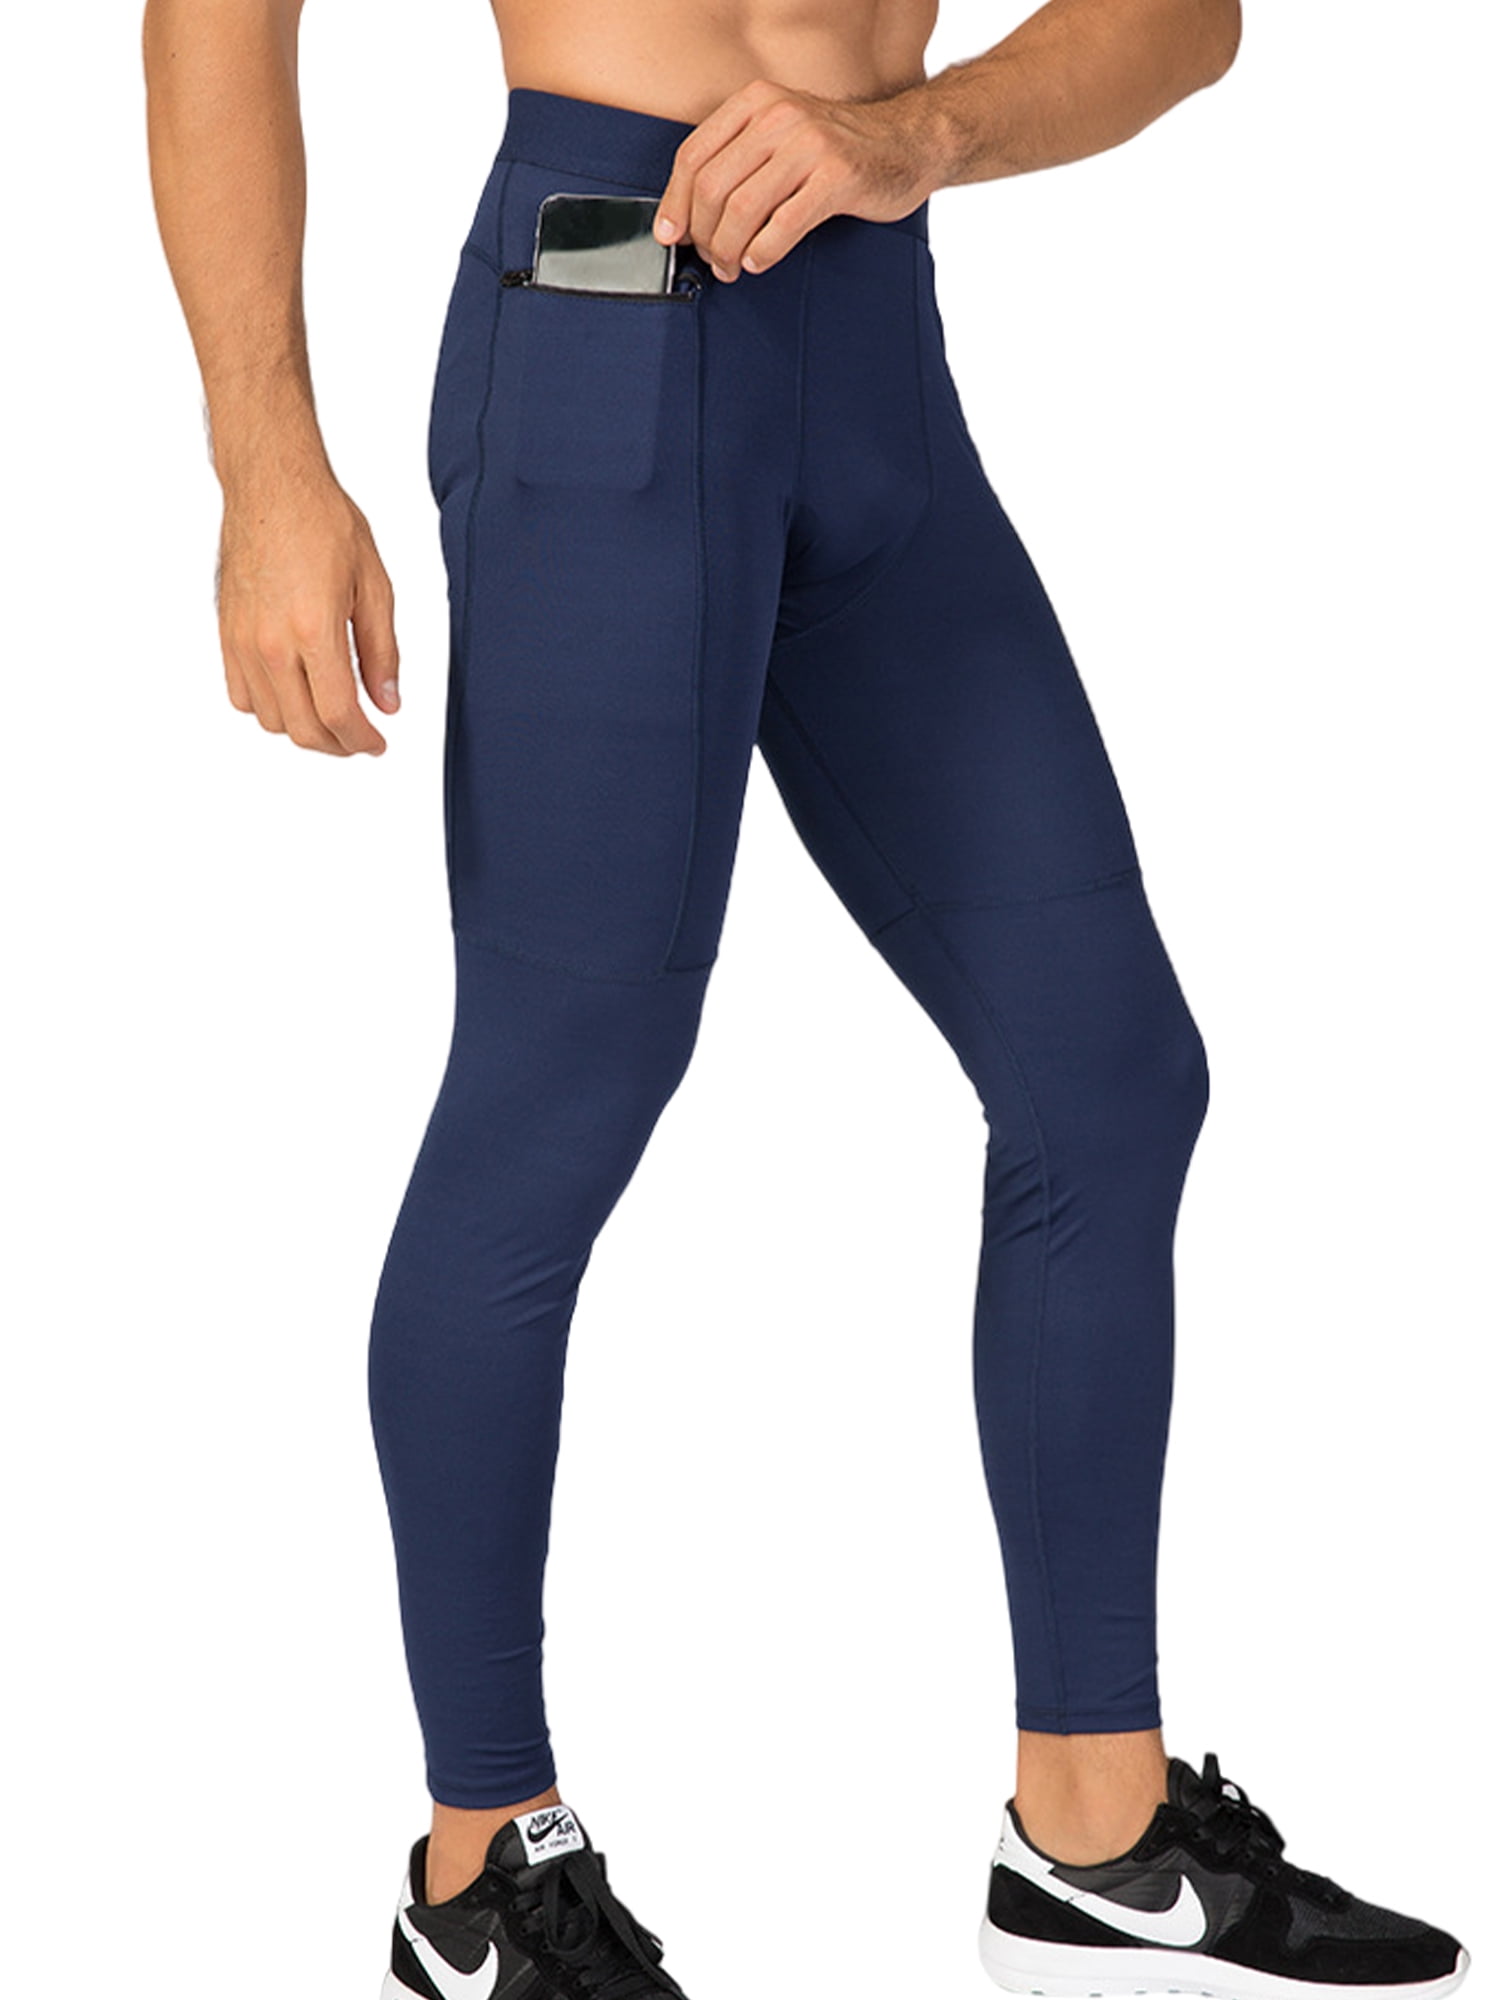 Frontwalk Mens Compression Pants Waisted Cool Dry Tights Running Athletic Sport Pant Elastic Waist Base Layer Navy Blue M - Walmart.com